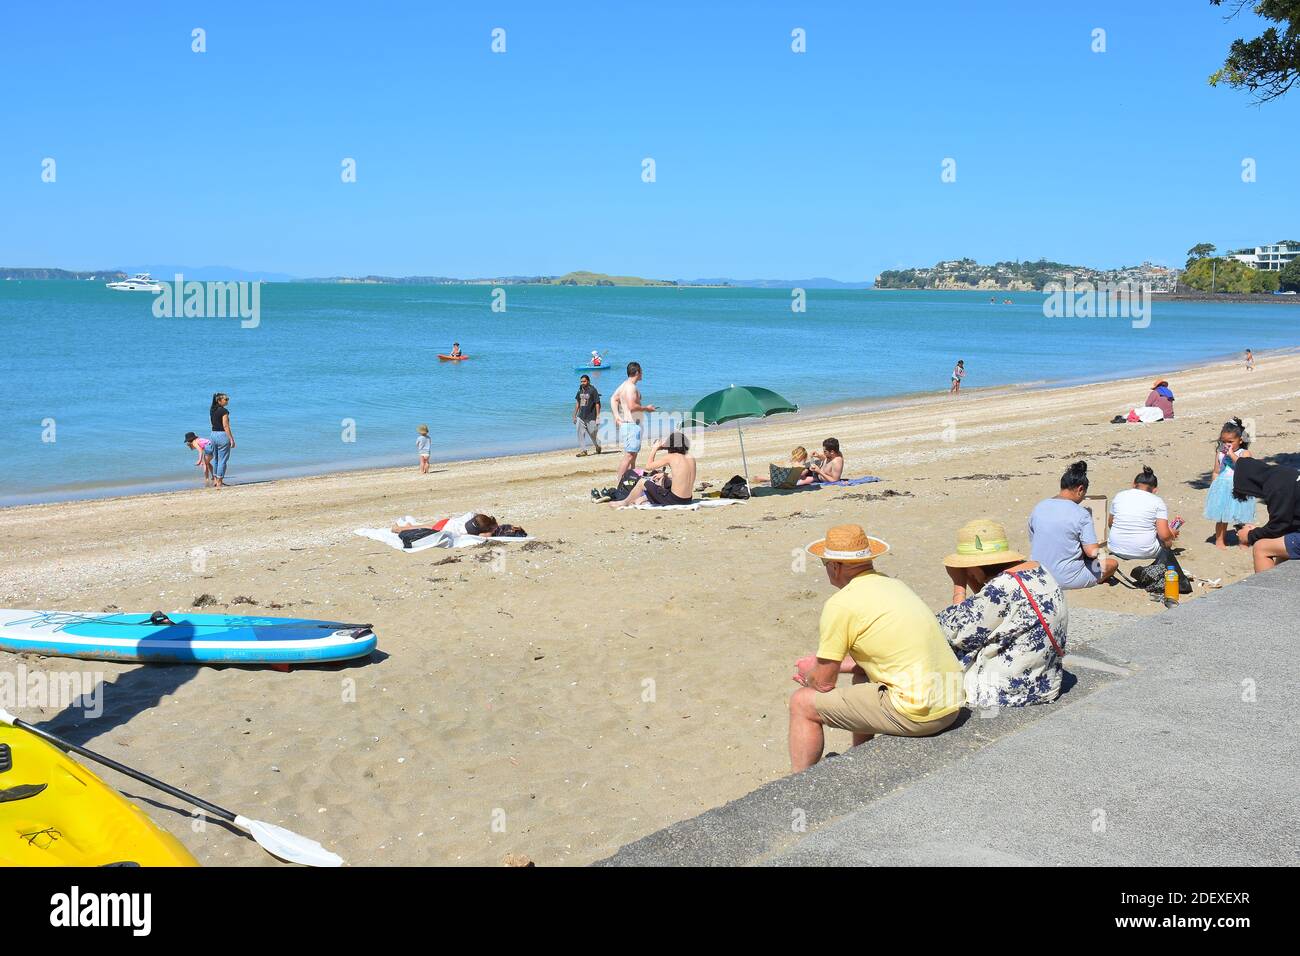 AUCKLAND, NEW ZEALAND - Nov 28, 2020: View of people at Mission Bay beach on weekend day Stock Photo